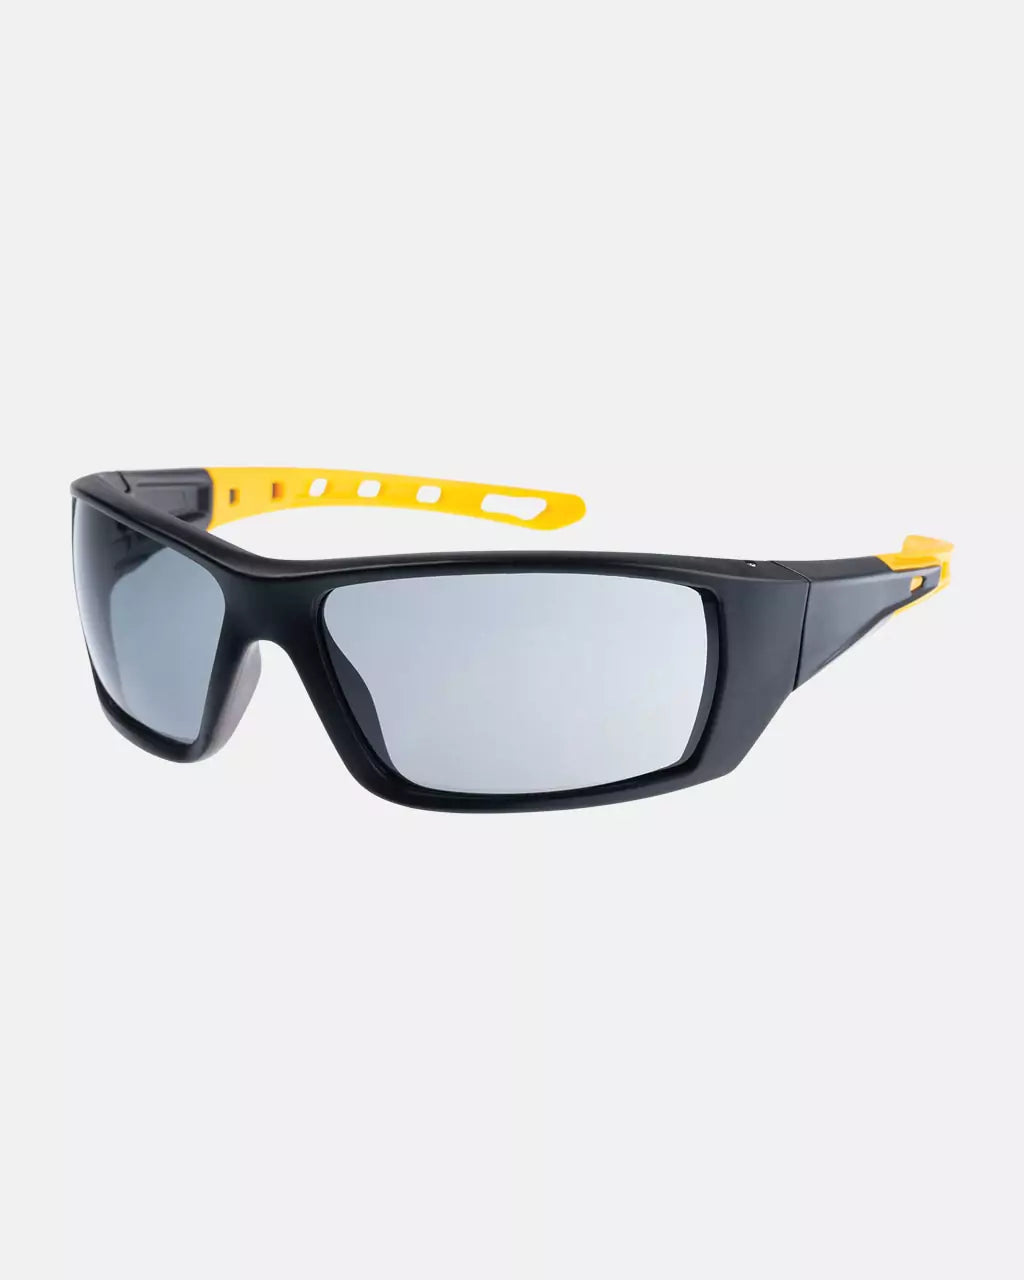 Caterpillar CAT Shield Safety Glasses - Eye Protection - Protective  Equipment - Workwear - Best Workwear